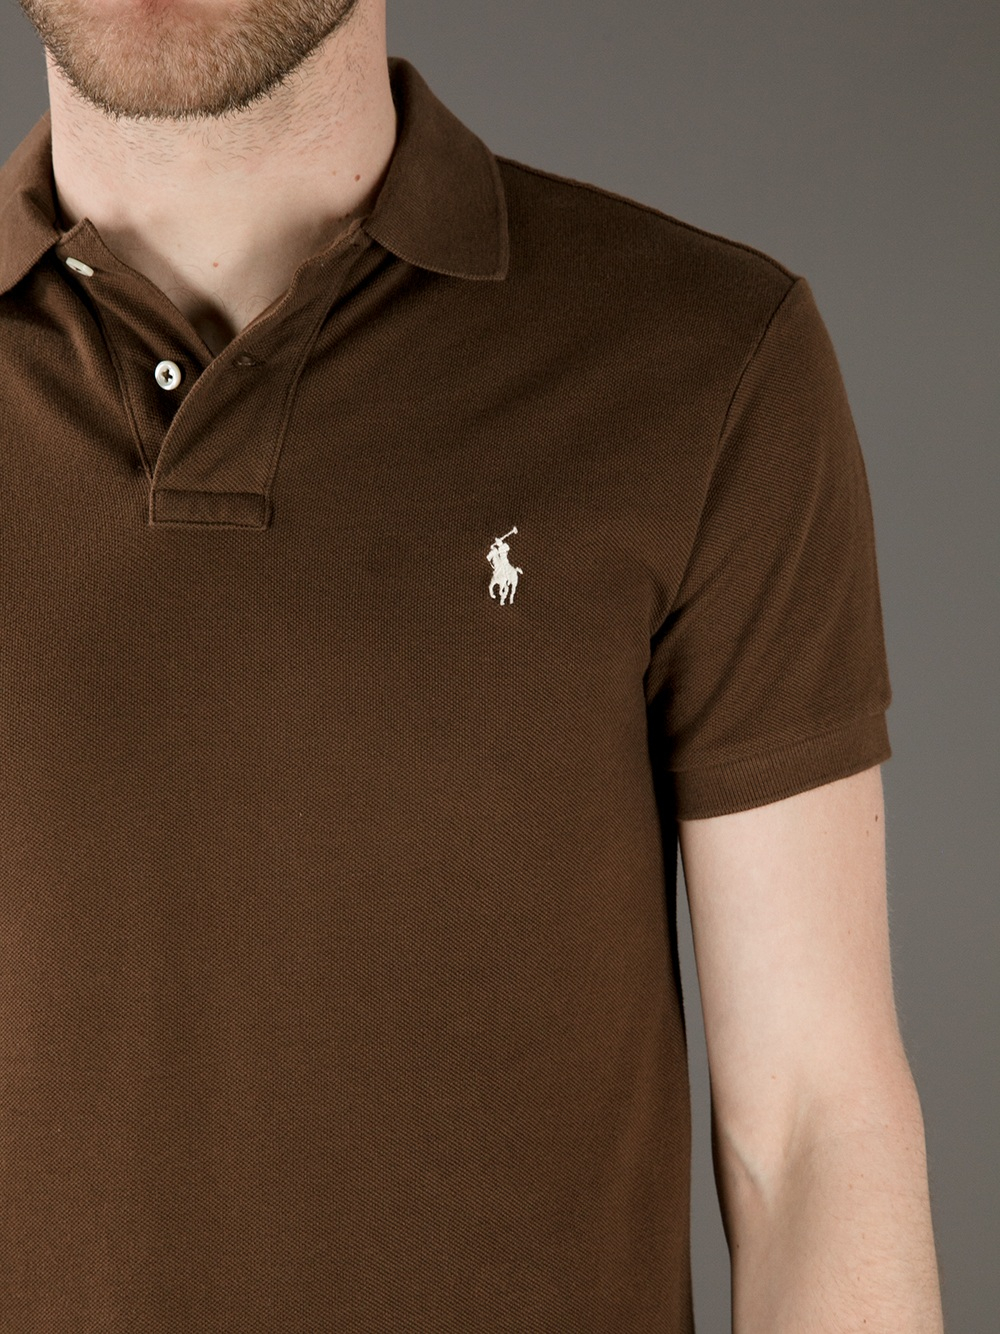 Polo Ralph Lauren Classic Polo Shirt in Brown for Men - Lyst